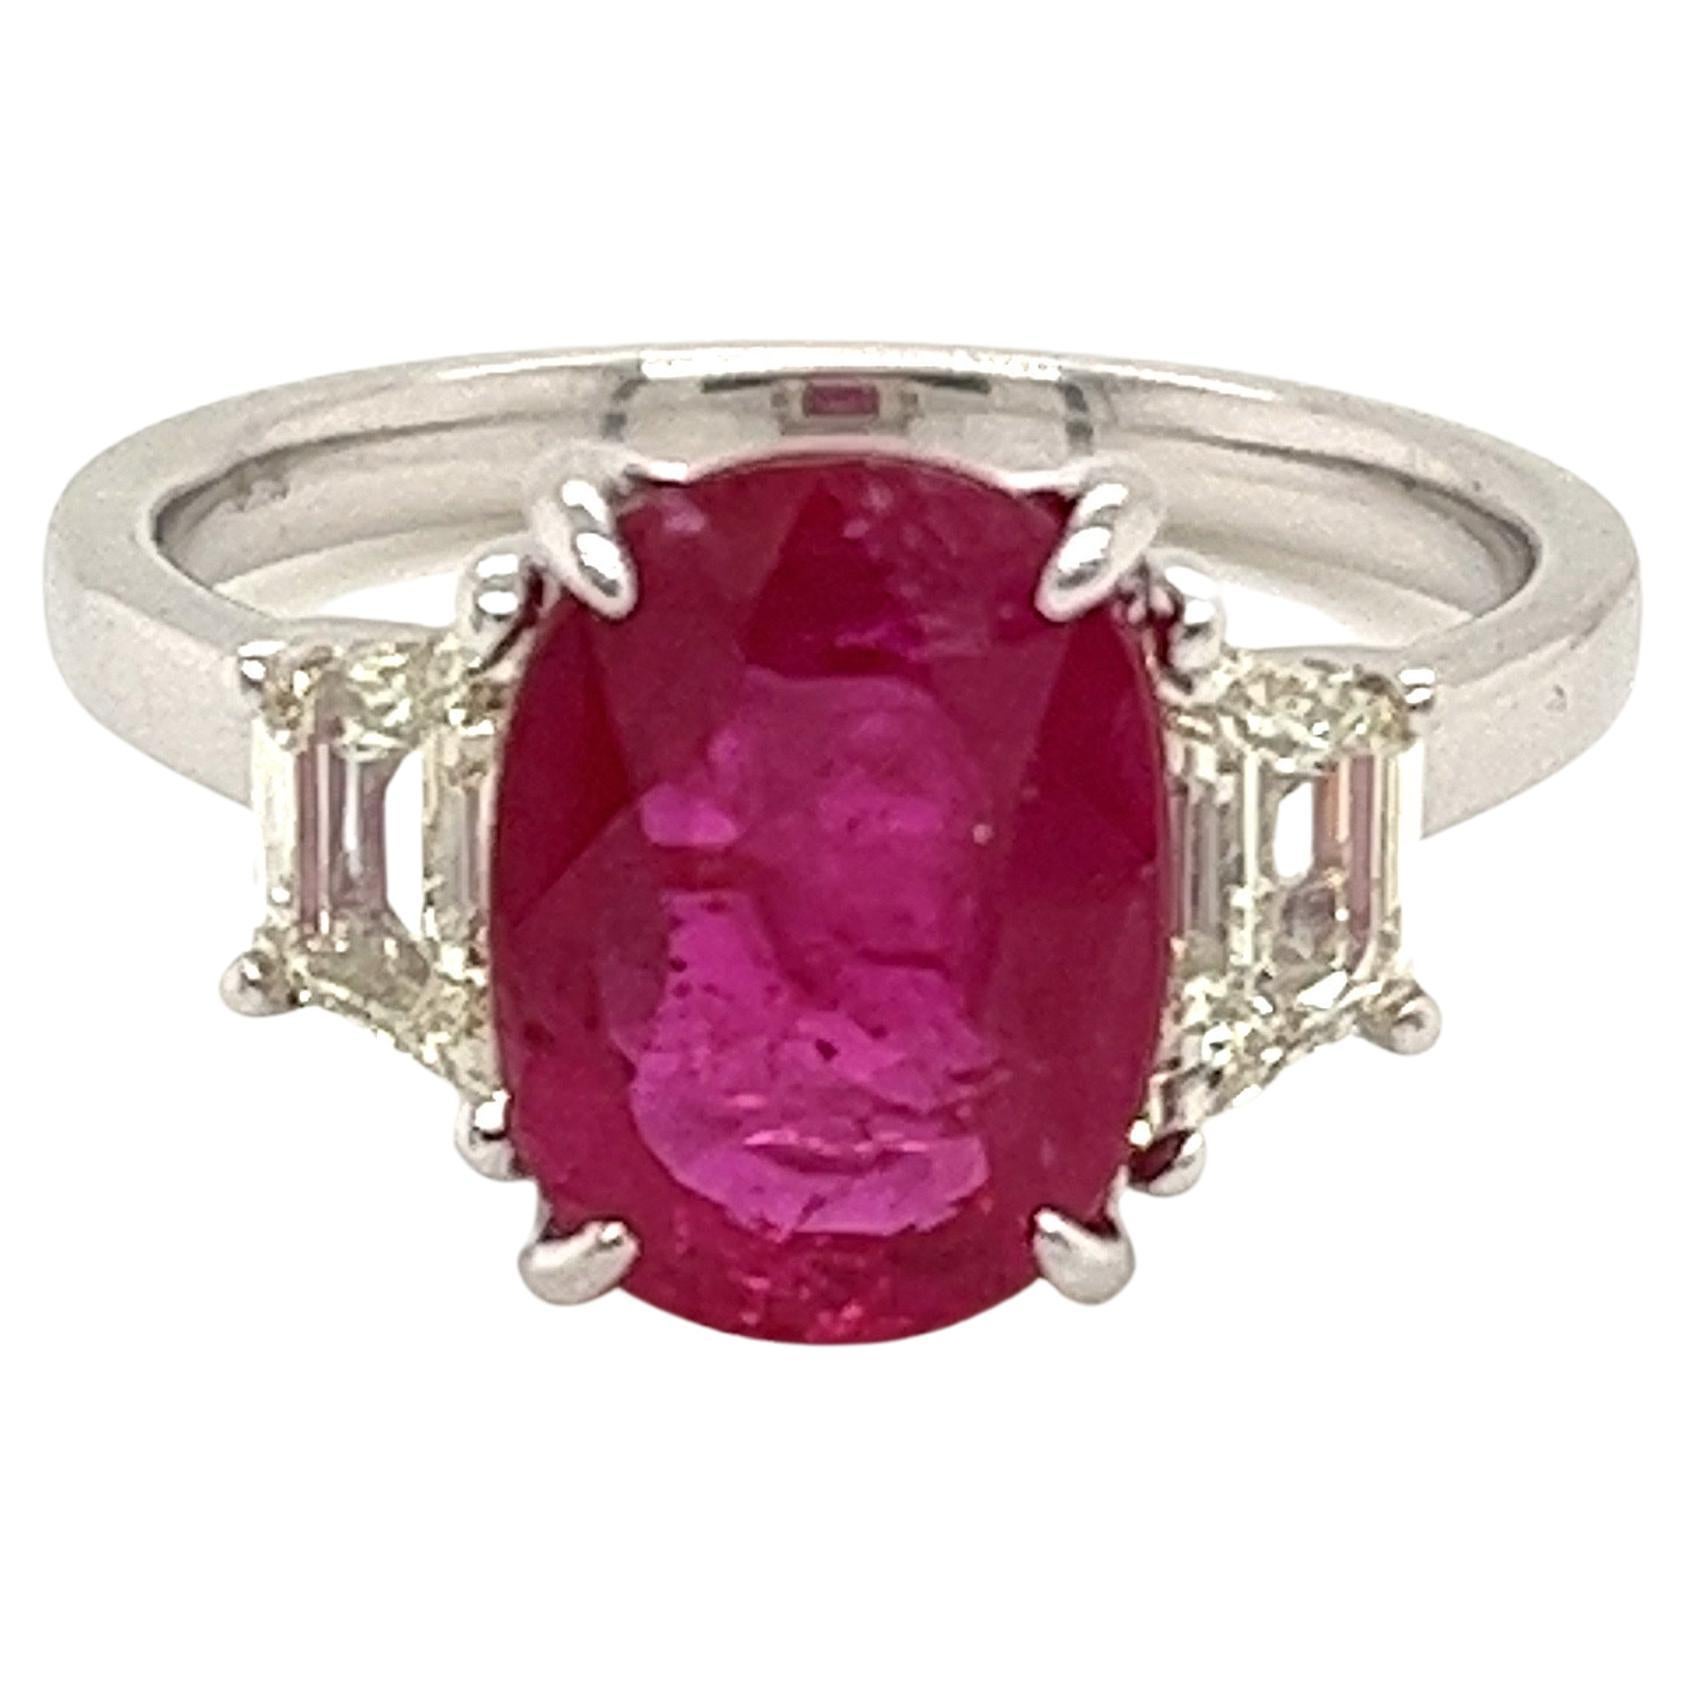 Certified 3.12 Carat Oval Mozambique Ruby & Diamond Ring in 18 Karat White Gold For Sale